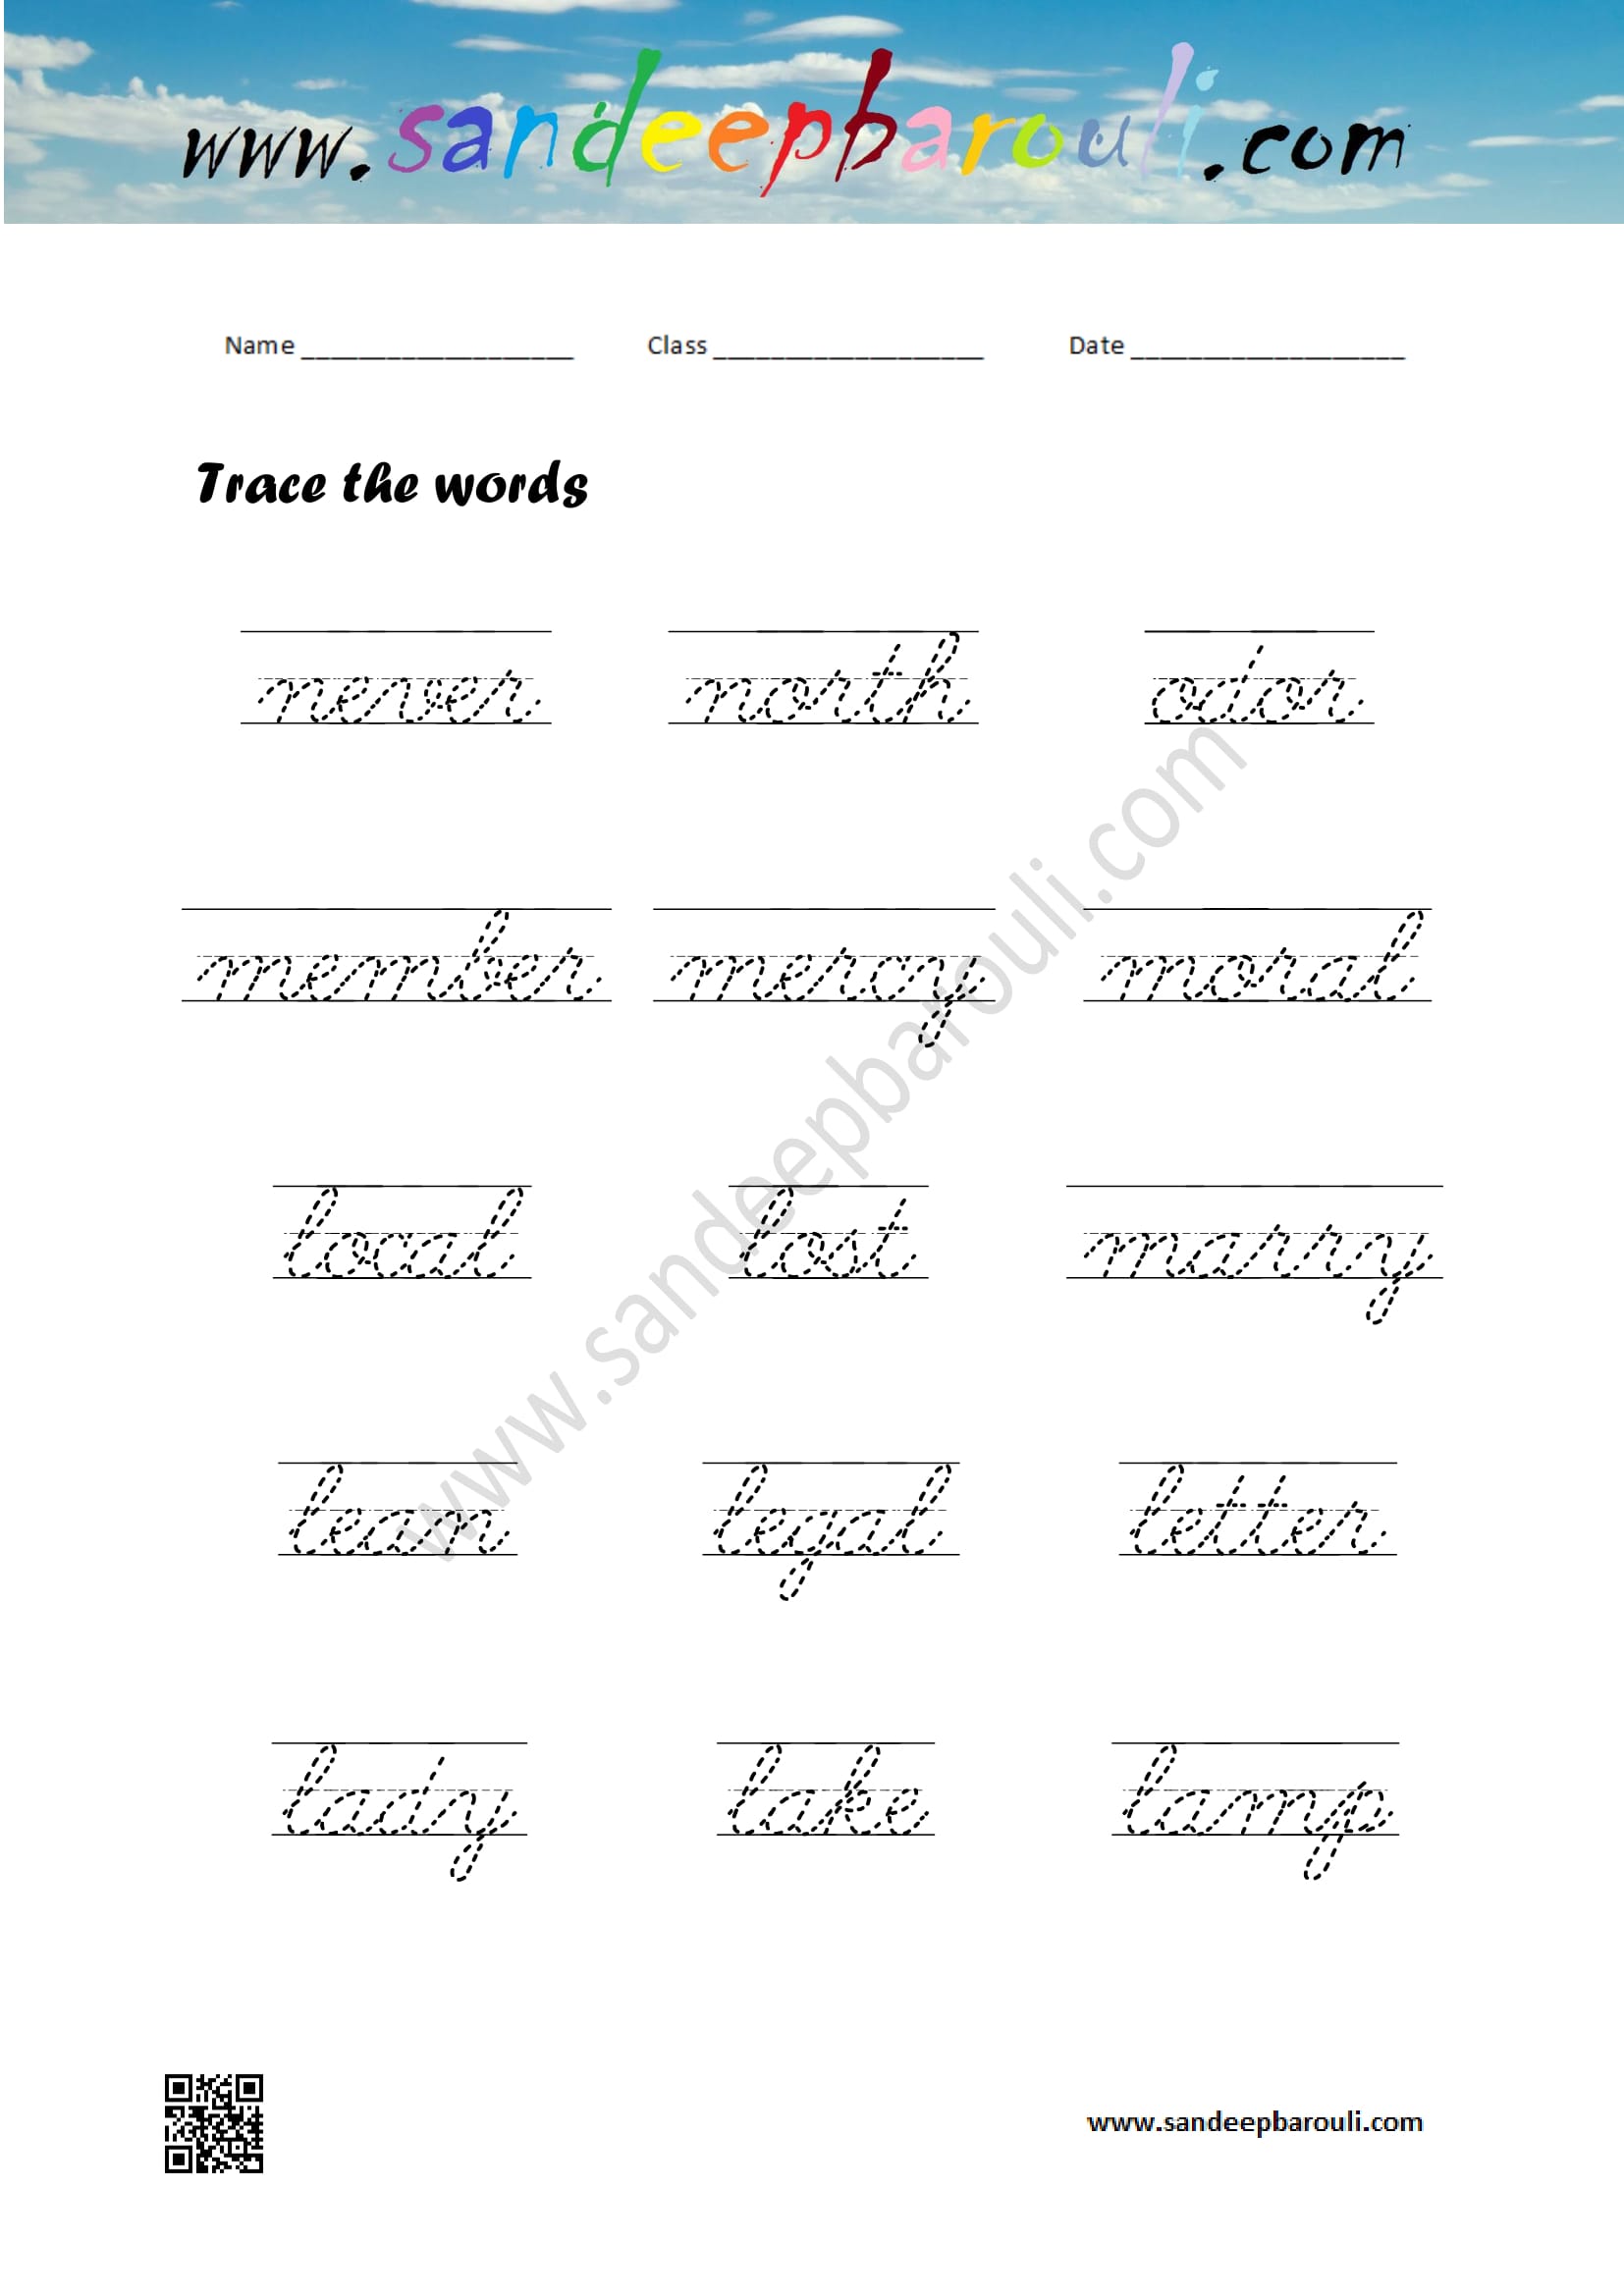 Cursive Writing Worksheet – Trace the words (33)